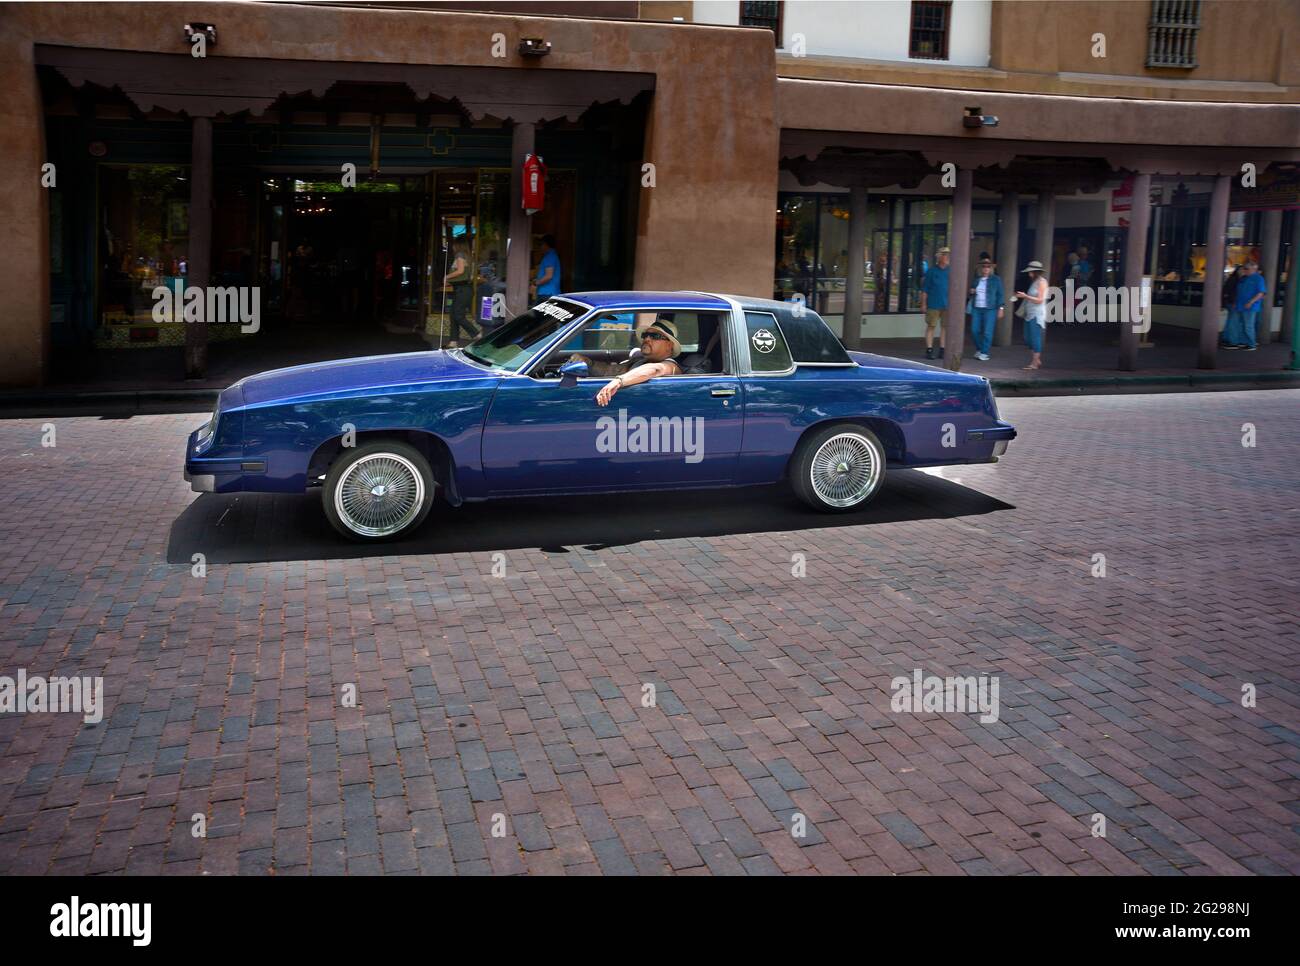 An hispanic man with a customized low-rider car cruises through the historic Plaza in Santa Fe, New Mexico. Stock Photo